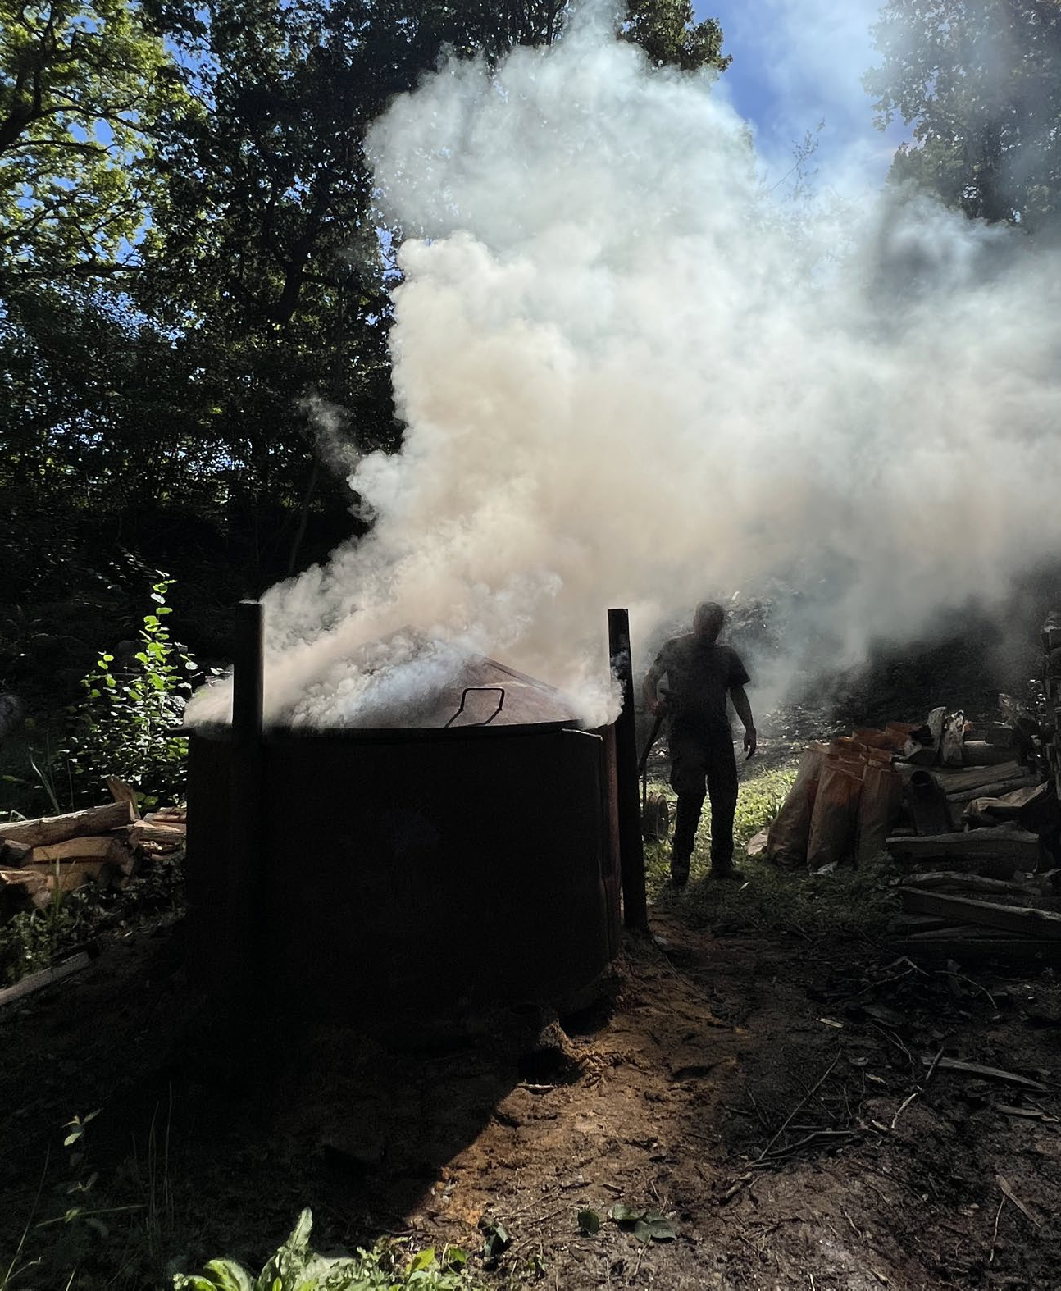 Smoke emitted from charcoal kiln in sunlit forest